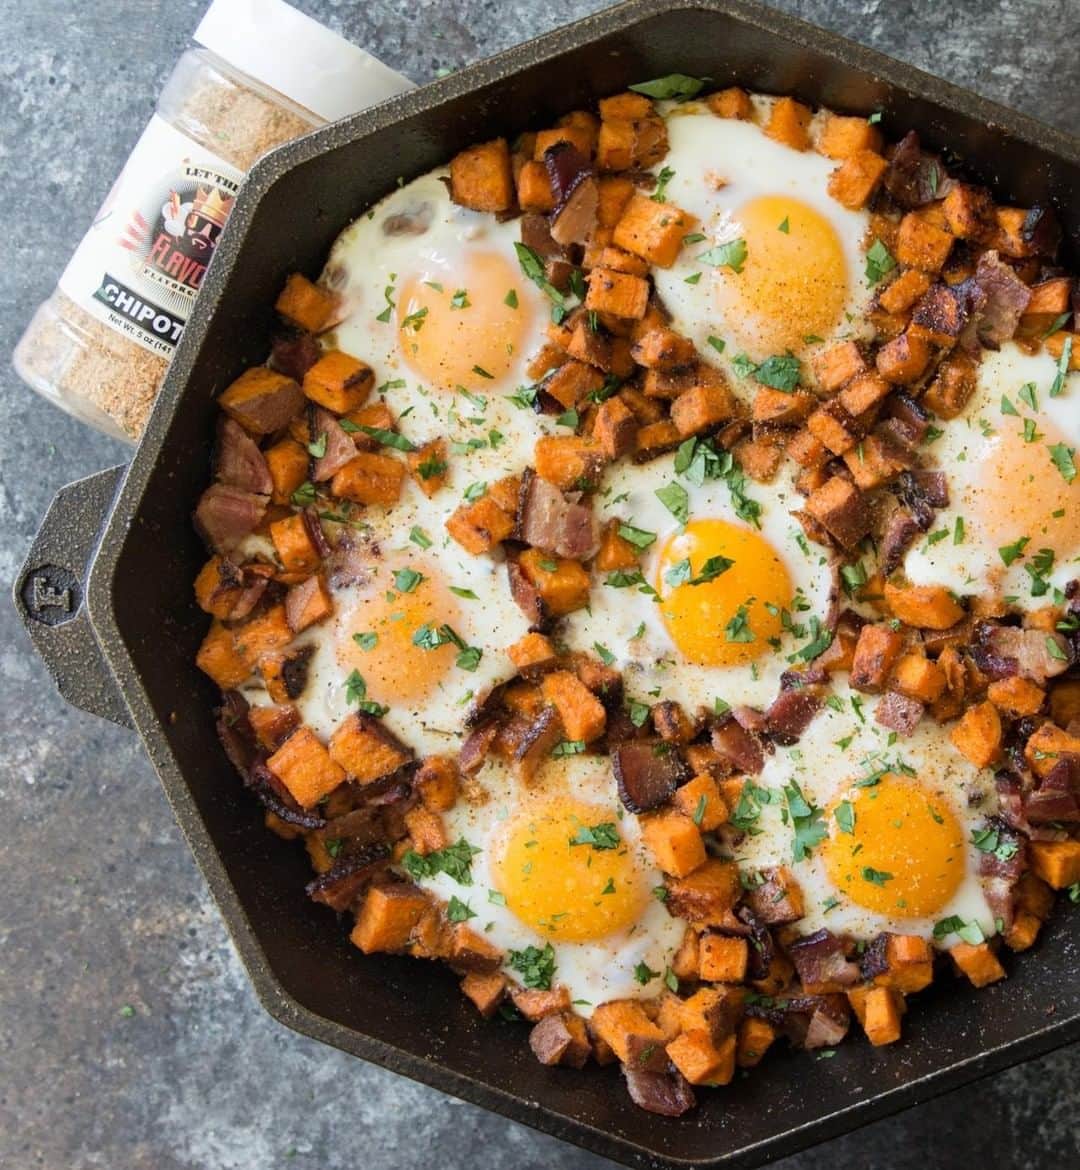 Flavorgod Seasoningsさんのインスタグラム写真 - (Flavorgod SeasoningsInstagram)「Sweet Potato, Bacon and Egg Skillet 🥘🥘🥘⁣ .⁣ Made with:⁣ 👉 #flavorgod Chipotle⁣ 👉 #flavorgod Pink Salt & Pepper⁣ -⁣ On Sale here ⬇️⁣ Click the link in the bio -> @flavorgod⁣ www.flavorgod.com⁣ .⁣ INGREDIENTS:⁣ 1-1.5 lbs sweet potatoes, diced⁣ 1 lb bacon⁣ 6-8 eggs, room temp is best⁣ 2 tbsp solid cooking fat⁣ 1 tsp FlavorGod Pink S+P⁣ 1 tbsp FlavorGod Chipotle⁣ cilantro to garnish⁣ ⁣ DIRECTIONS:⁣ Place bacon on baking sheet and cook in 400F oven for about 15-20 minutes, or until done. Set aside on paper towels.⁣ .⁣ While bacon is cooking, heat ghee in 12" cast iron skillet over med-high, then add diced sweet potatoes. Season with pink s+p and chipotle seasonings. Cook potatoes for about 10-15 minutes, stirring a few times. Potatoes should be fork tender.⁣ .⁣ Add bacon and stir into potatoes. With a spoon, make little holes to crack the eggs into. You can transfer the skillet to the oven for about 7 minutes to let egg whites set, or turn heat down and cover with a lid to cook eggs.⁣ ⁣ Garnish with cilantro and more flavorgod!」3月20日 22時00分 - flavorgod